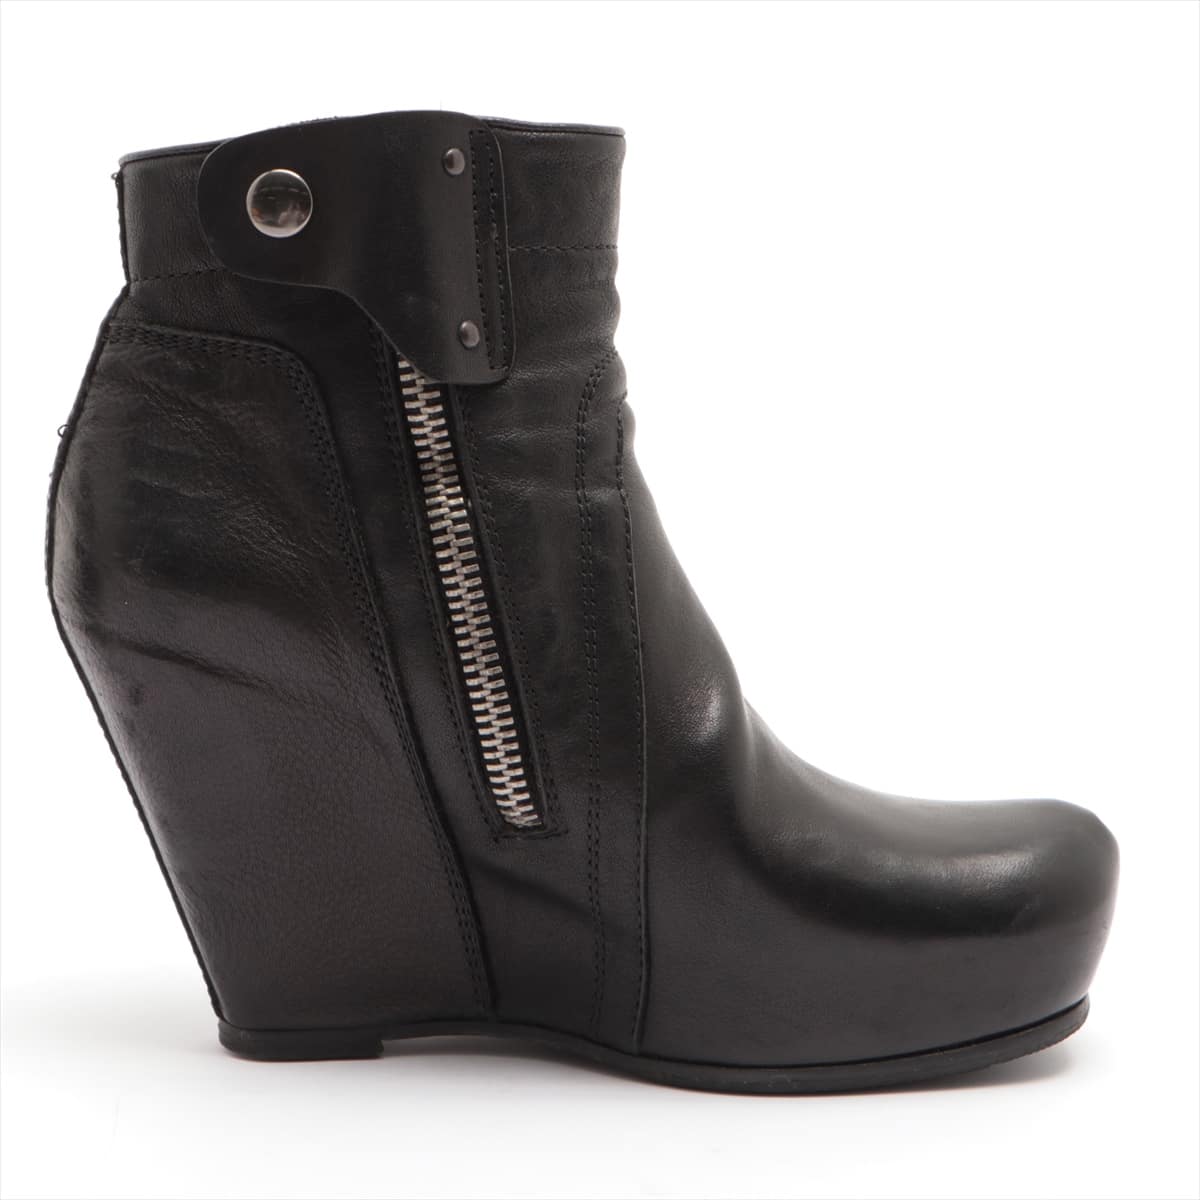 Rick Owens Leather Boots Unknown size Ladies' Black